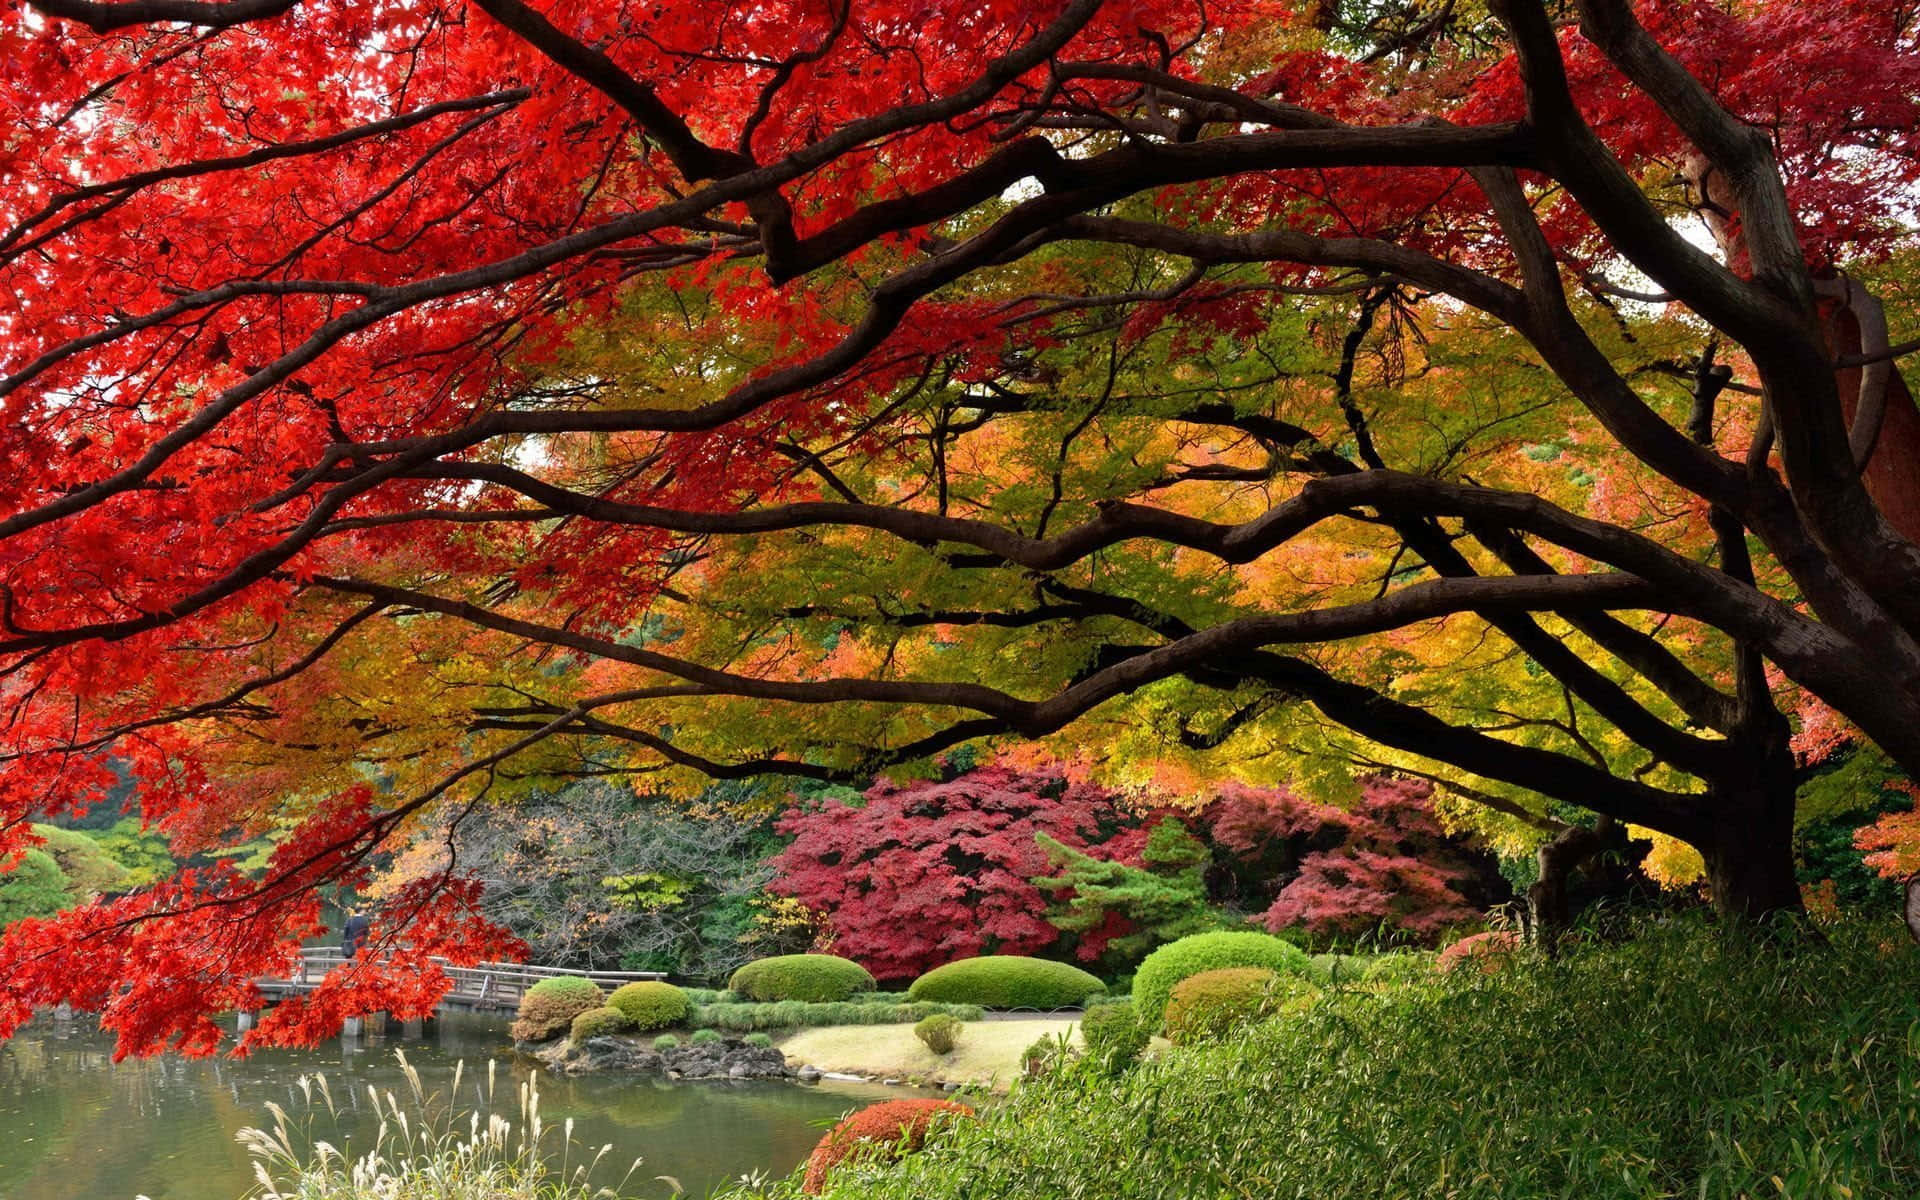 a red tree in a garden with a pond